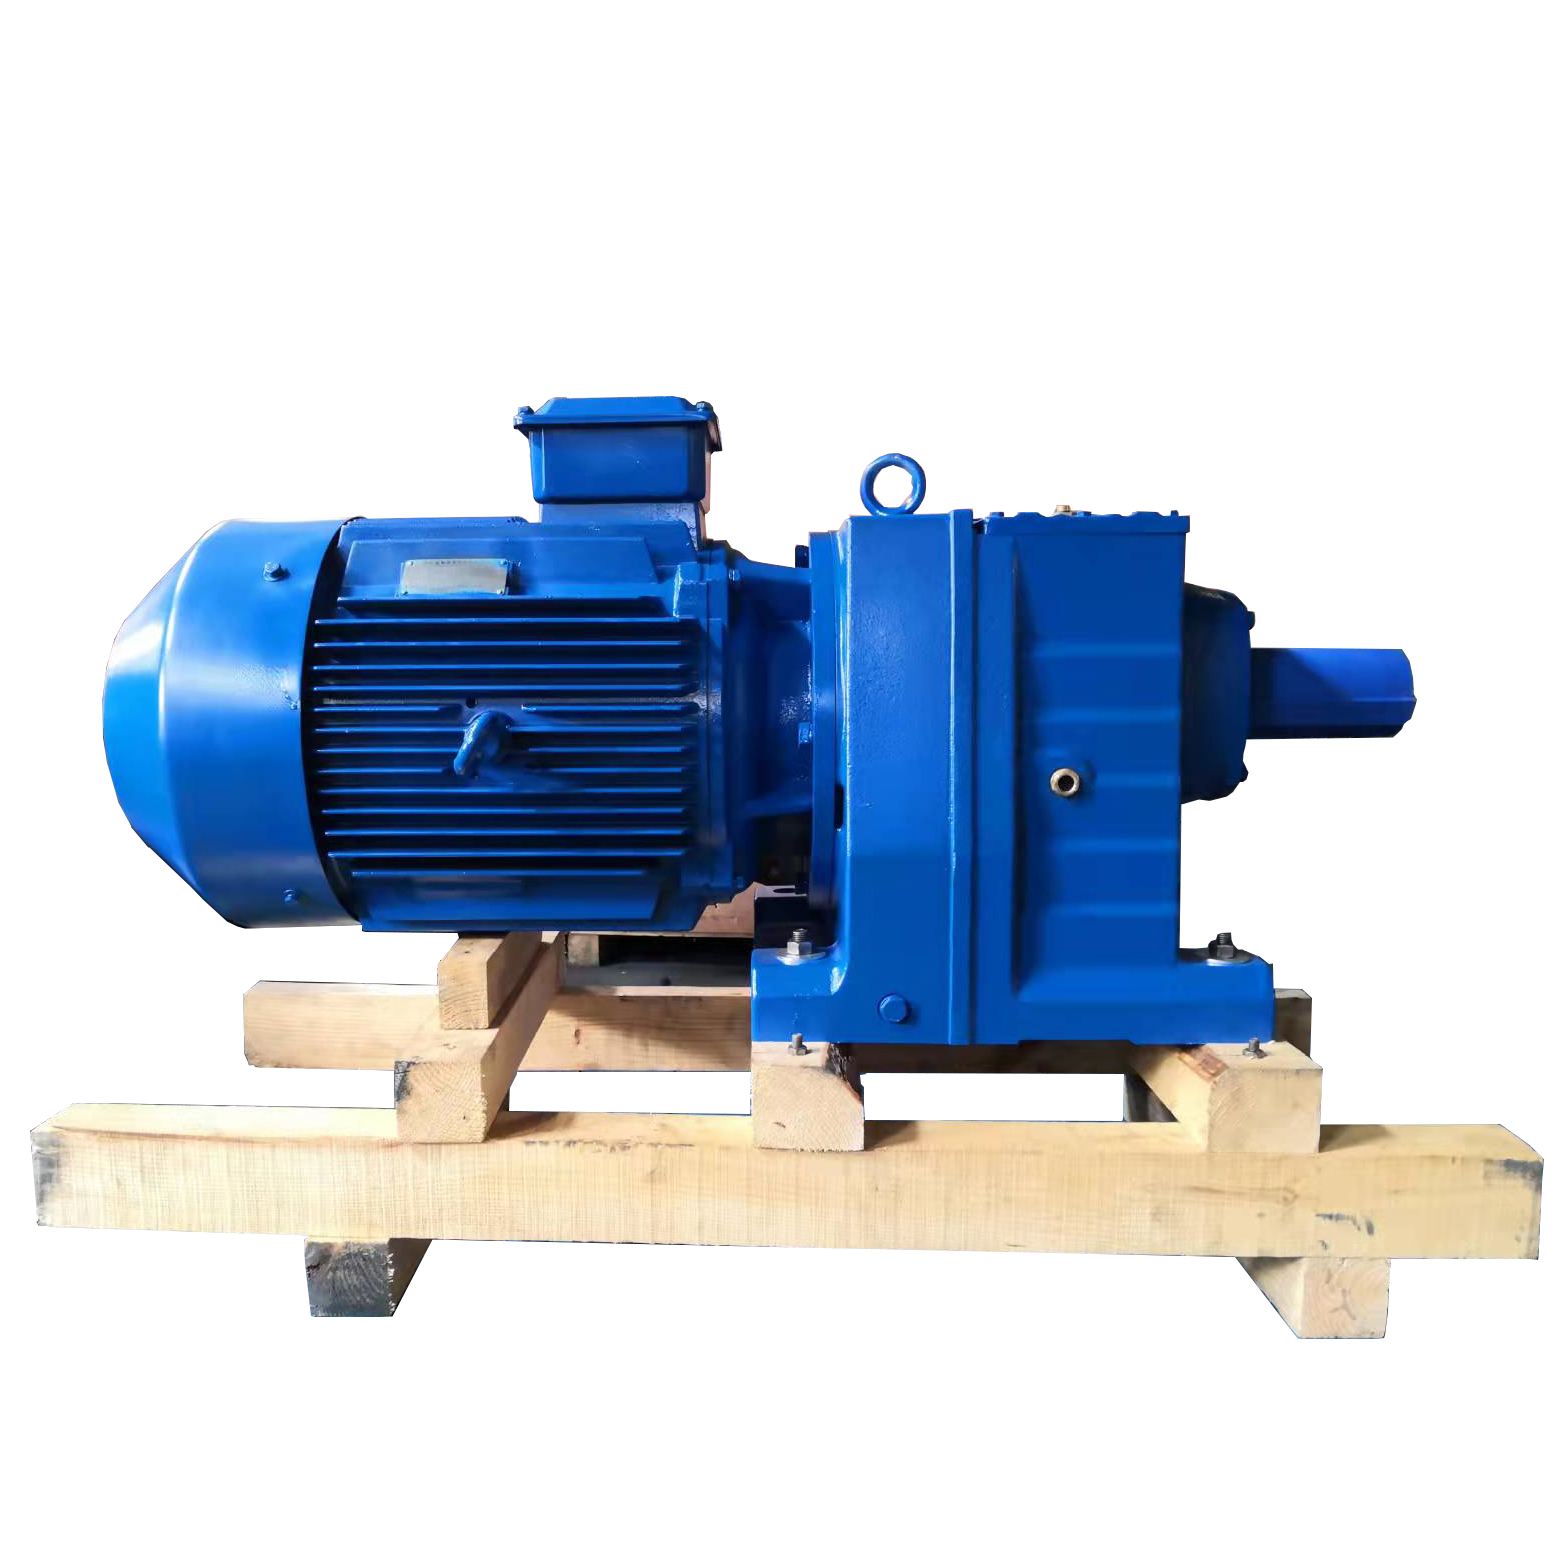 China Speed Reducer Suppliers EVERGEAR offer 1 30 ratio speed reducer gearbox